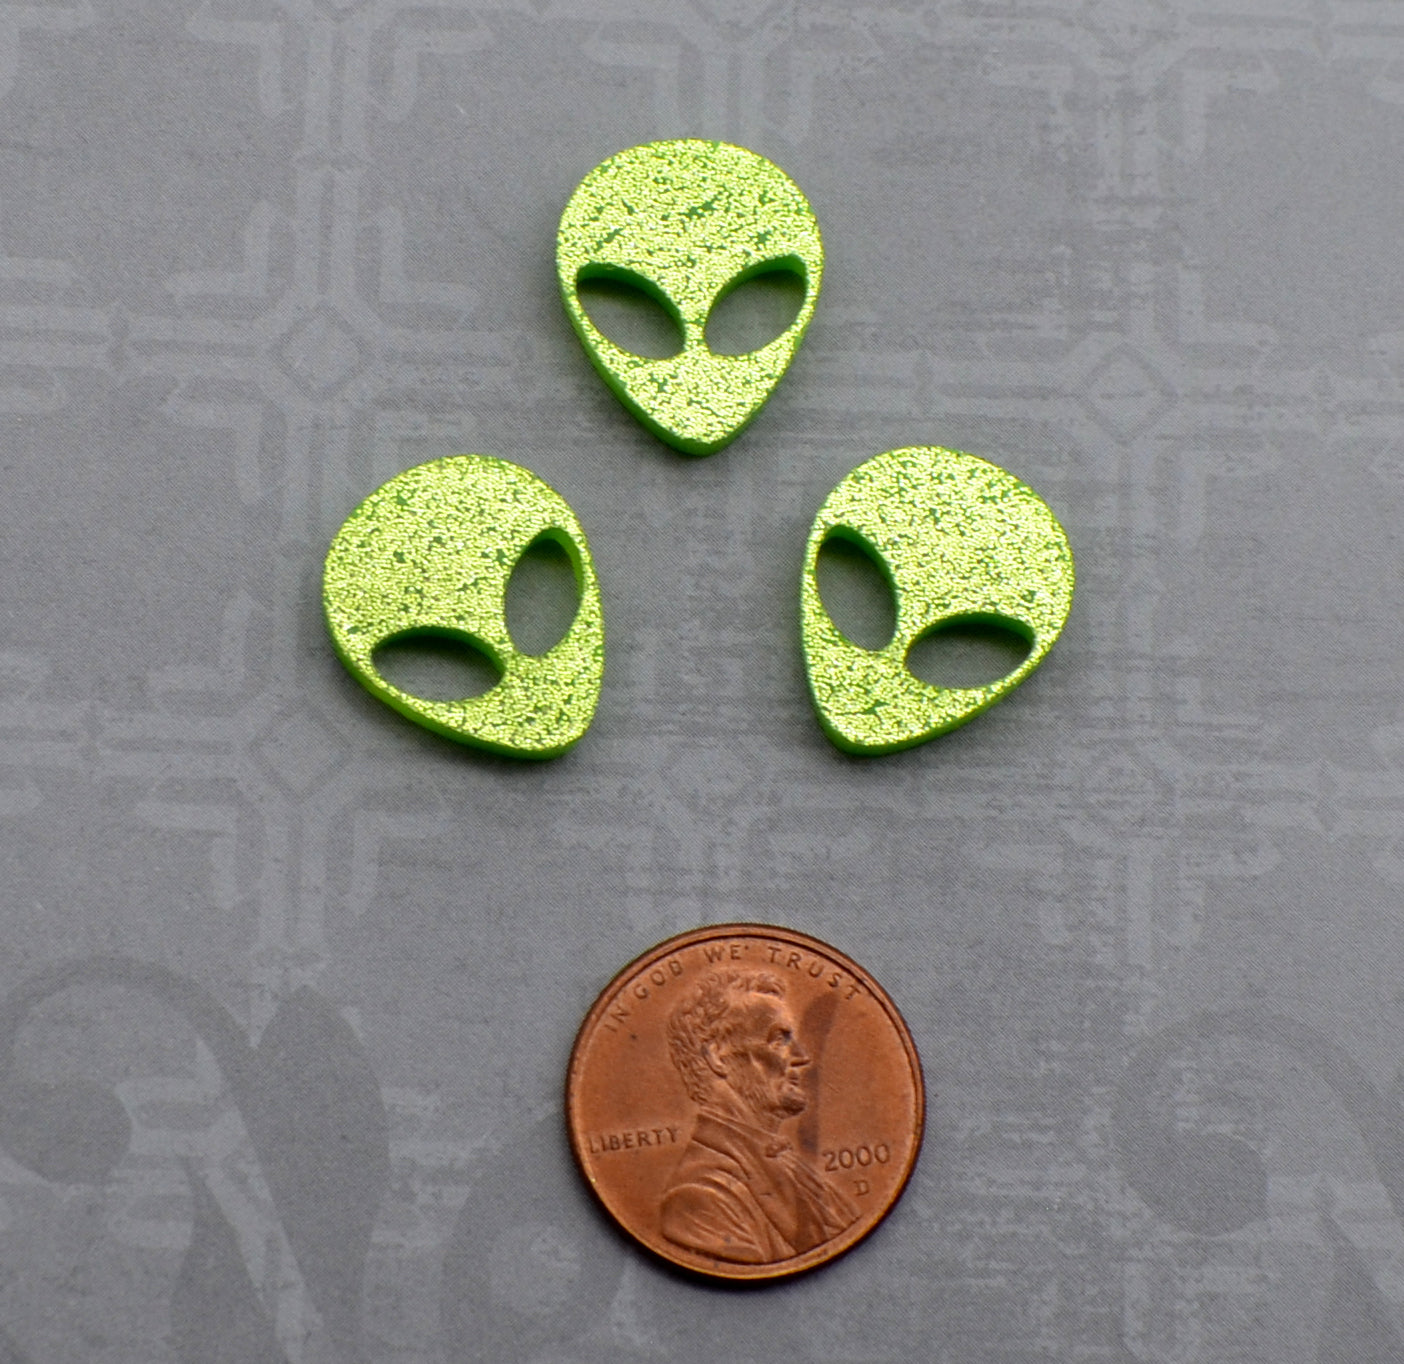 Lime GREEN GLITTER ALIENS 3 Pieces Flatback Cabochons In Laser Cut Acrylic